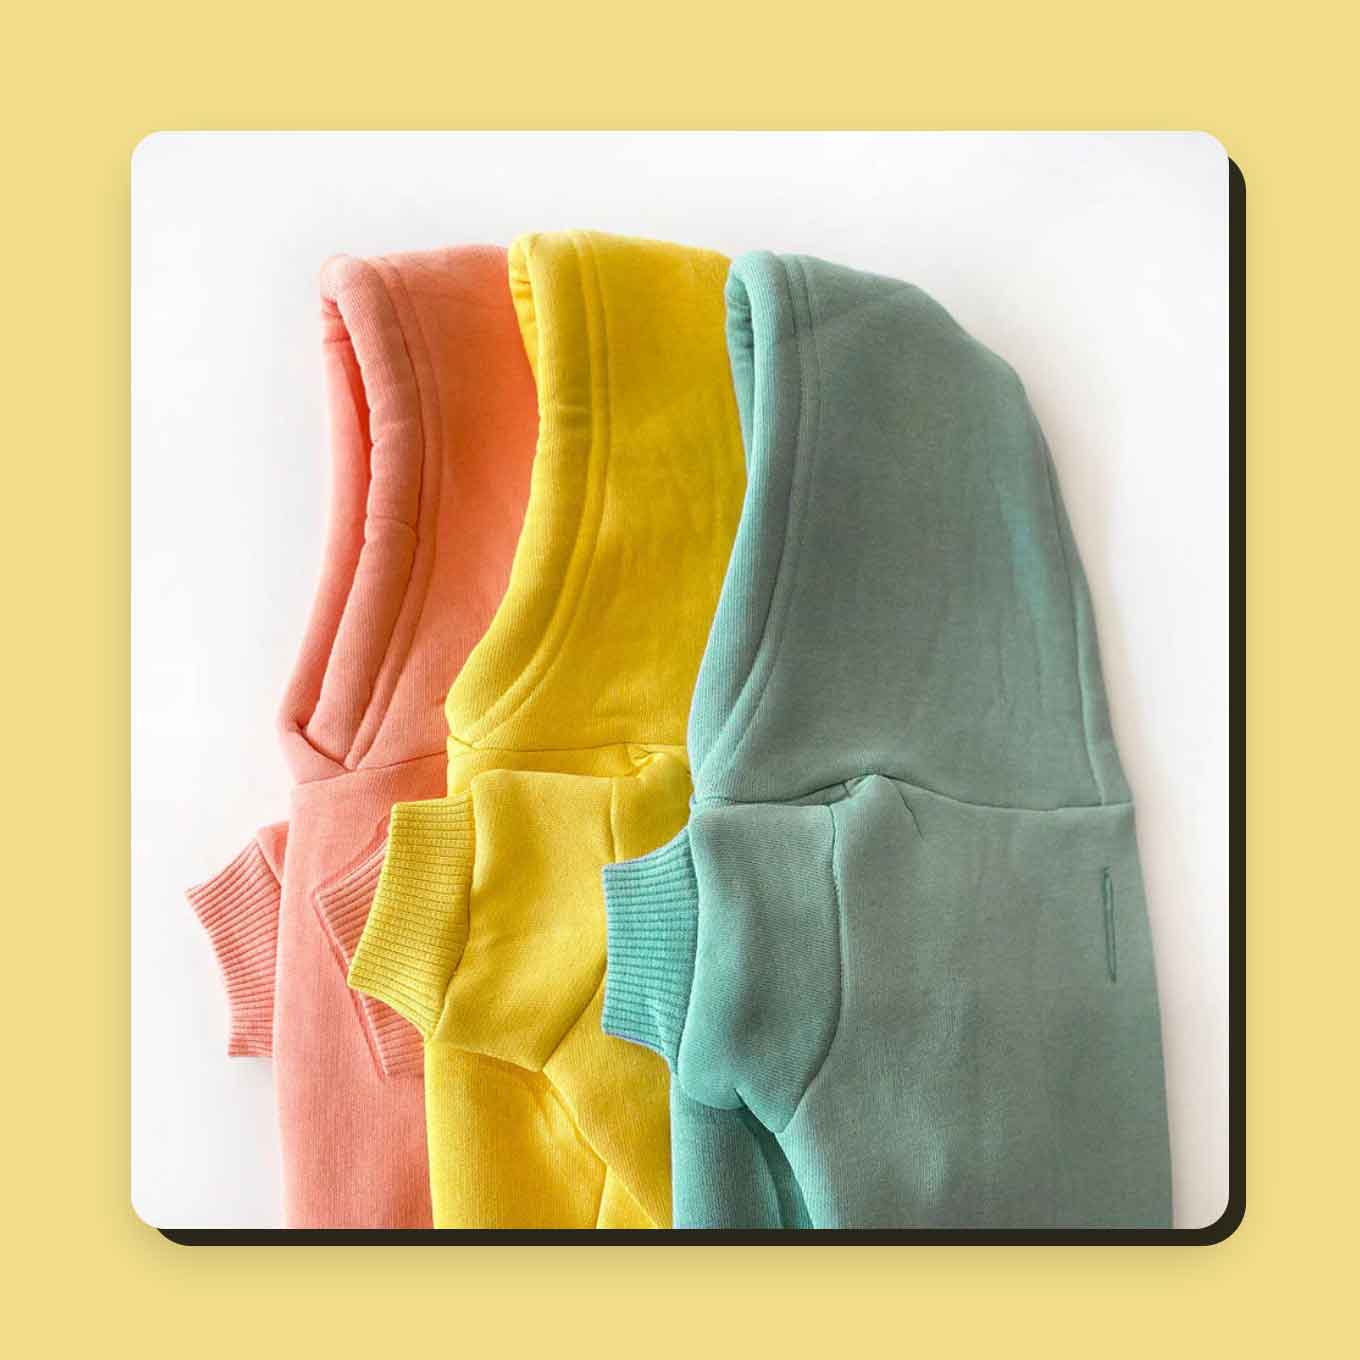 Three dog hoodies in peach, yellow, and mint